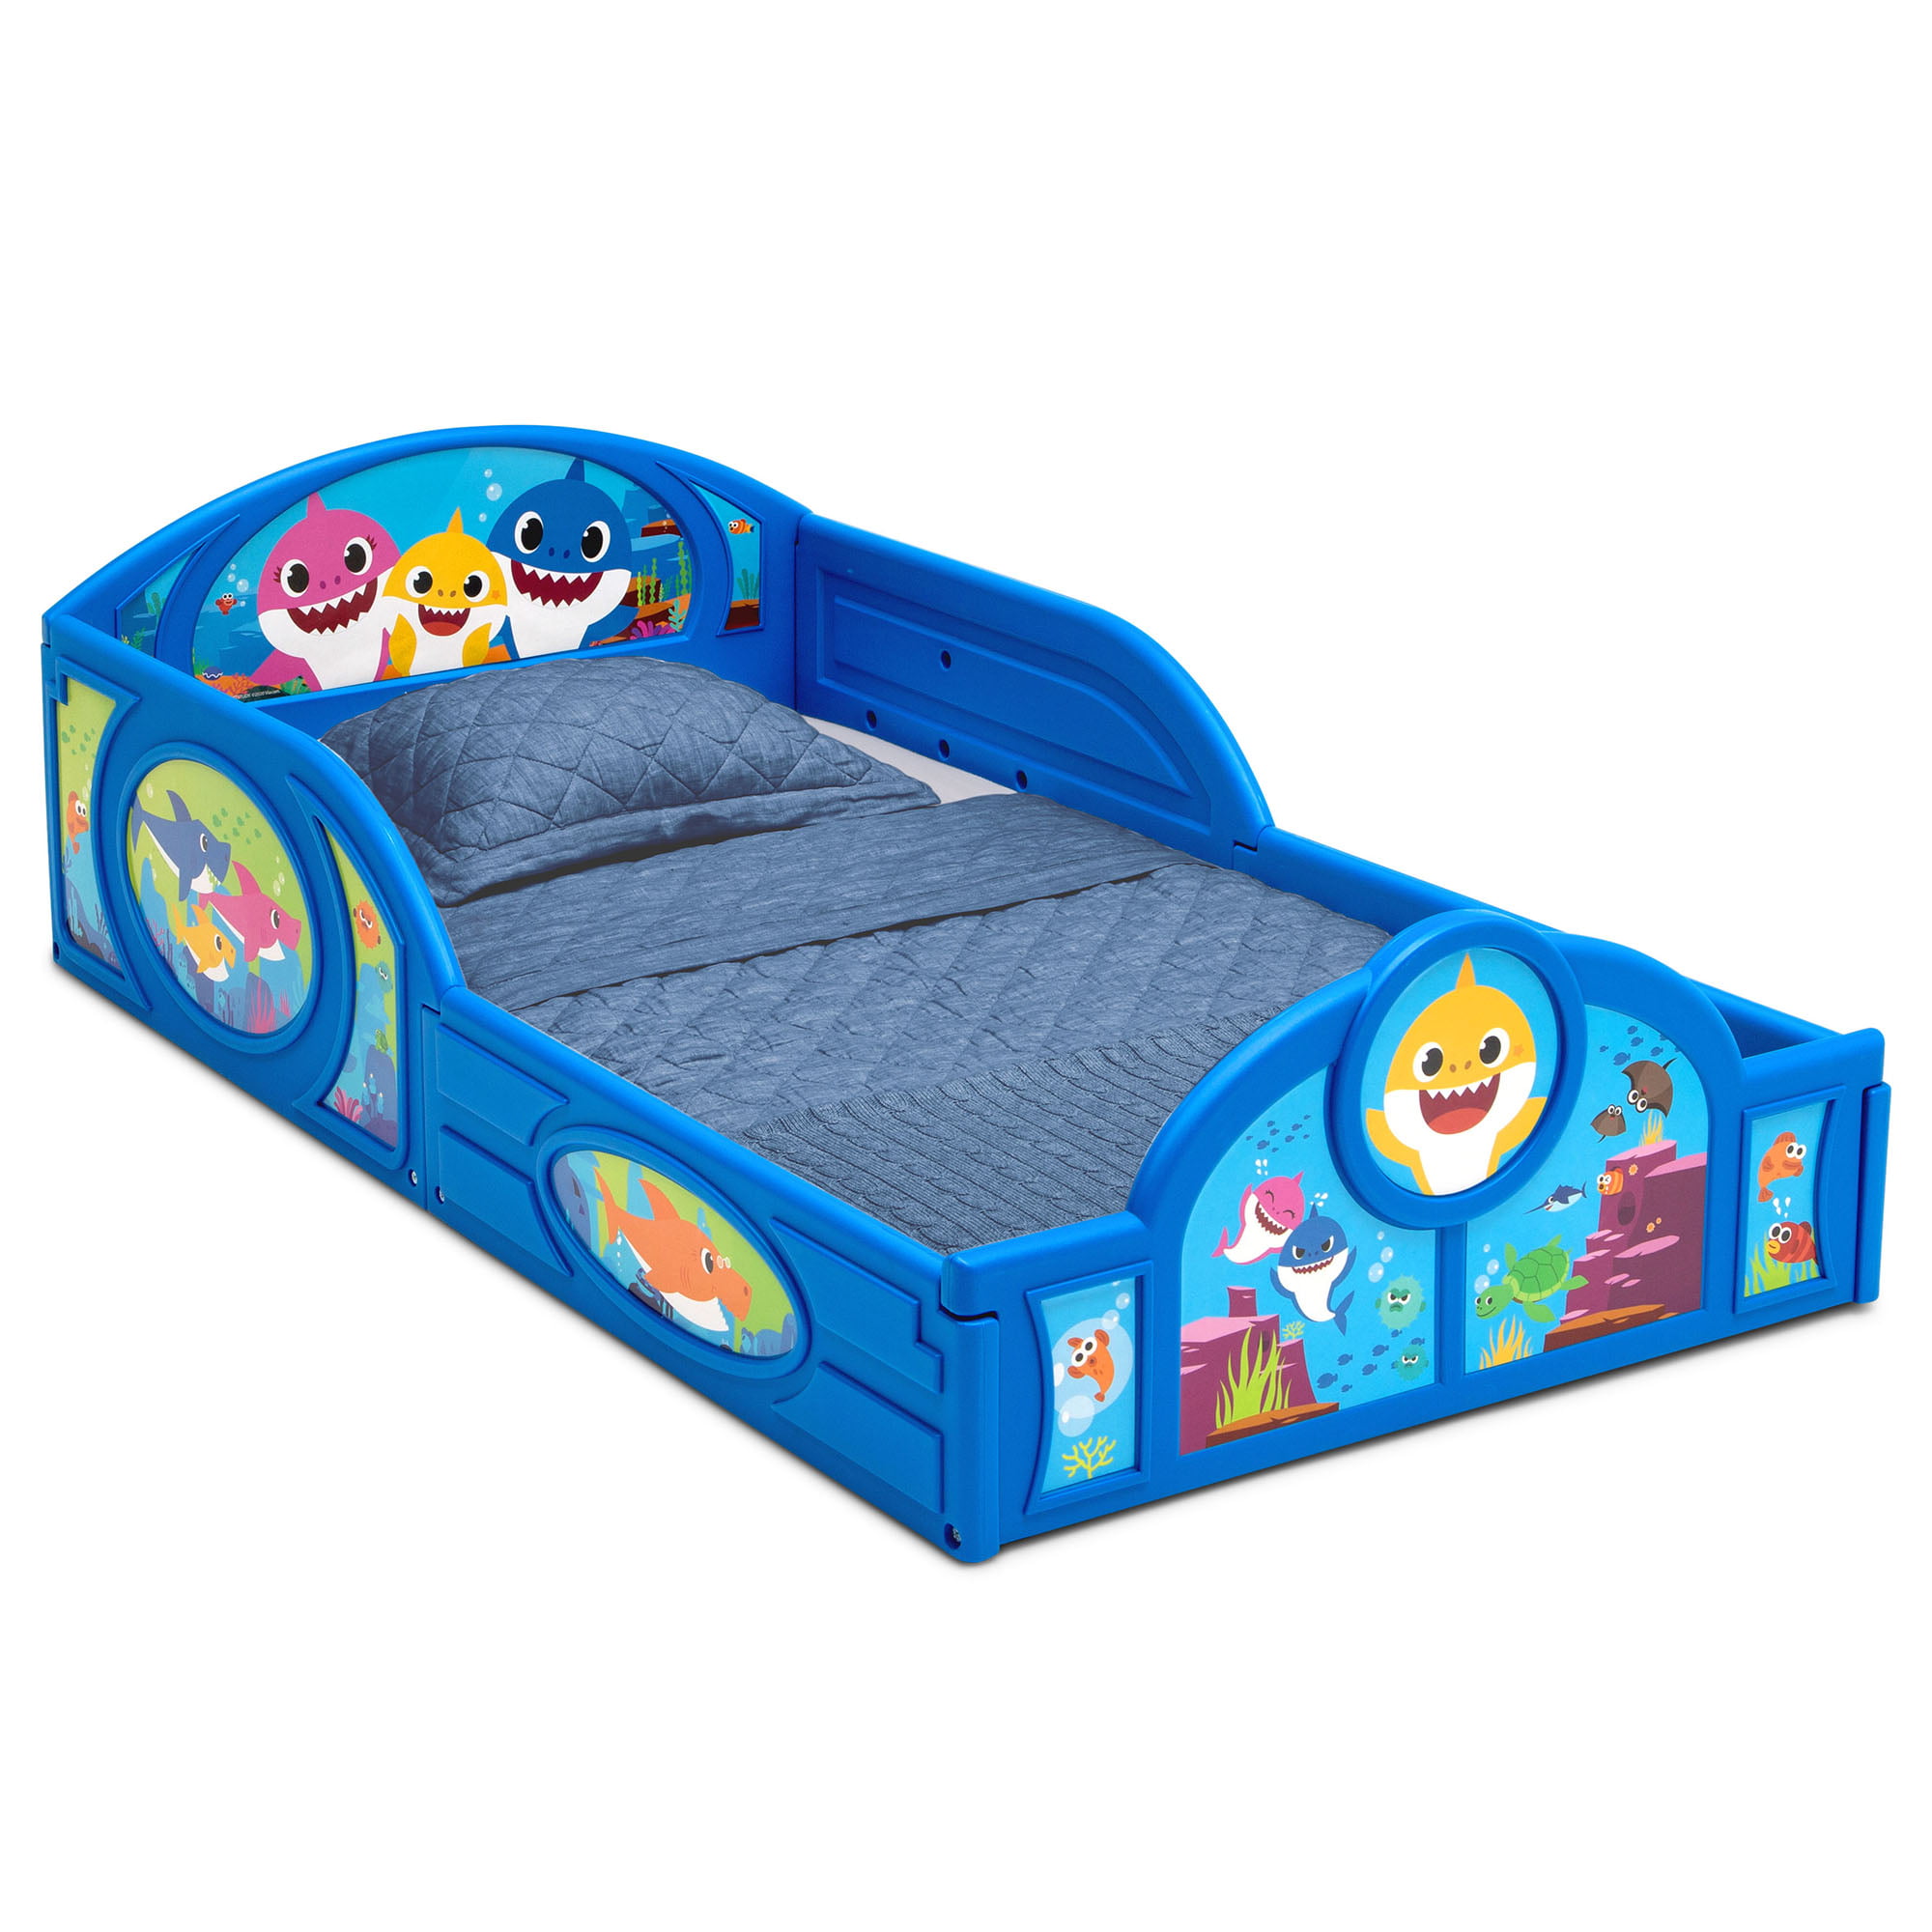 Baby Shark Sleep and Play Toddler Bed with Attached Guardrails